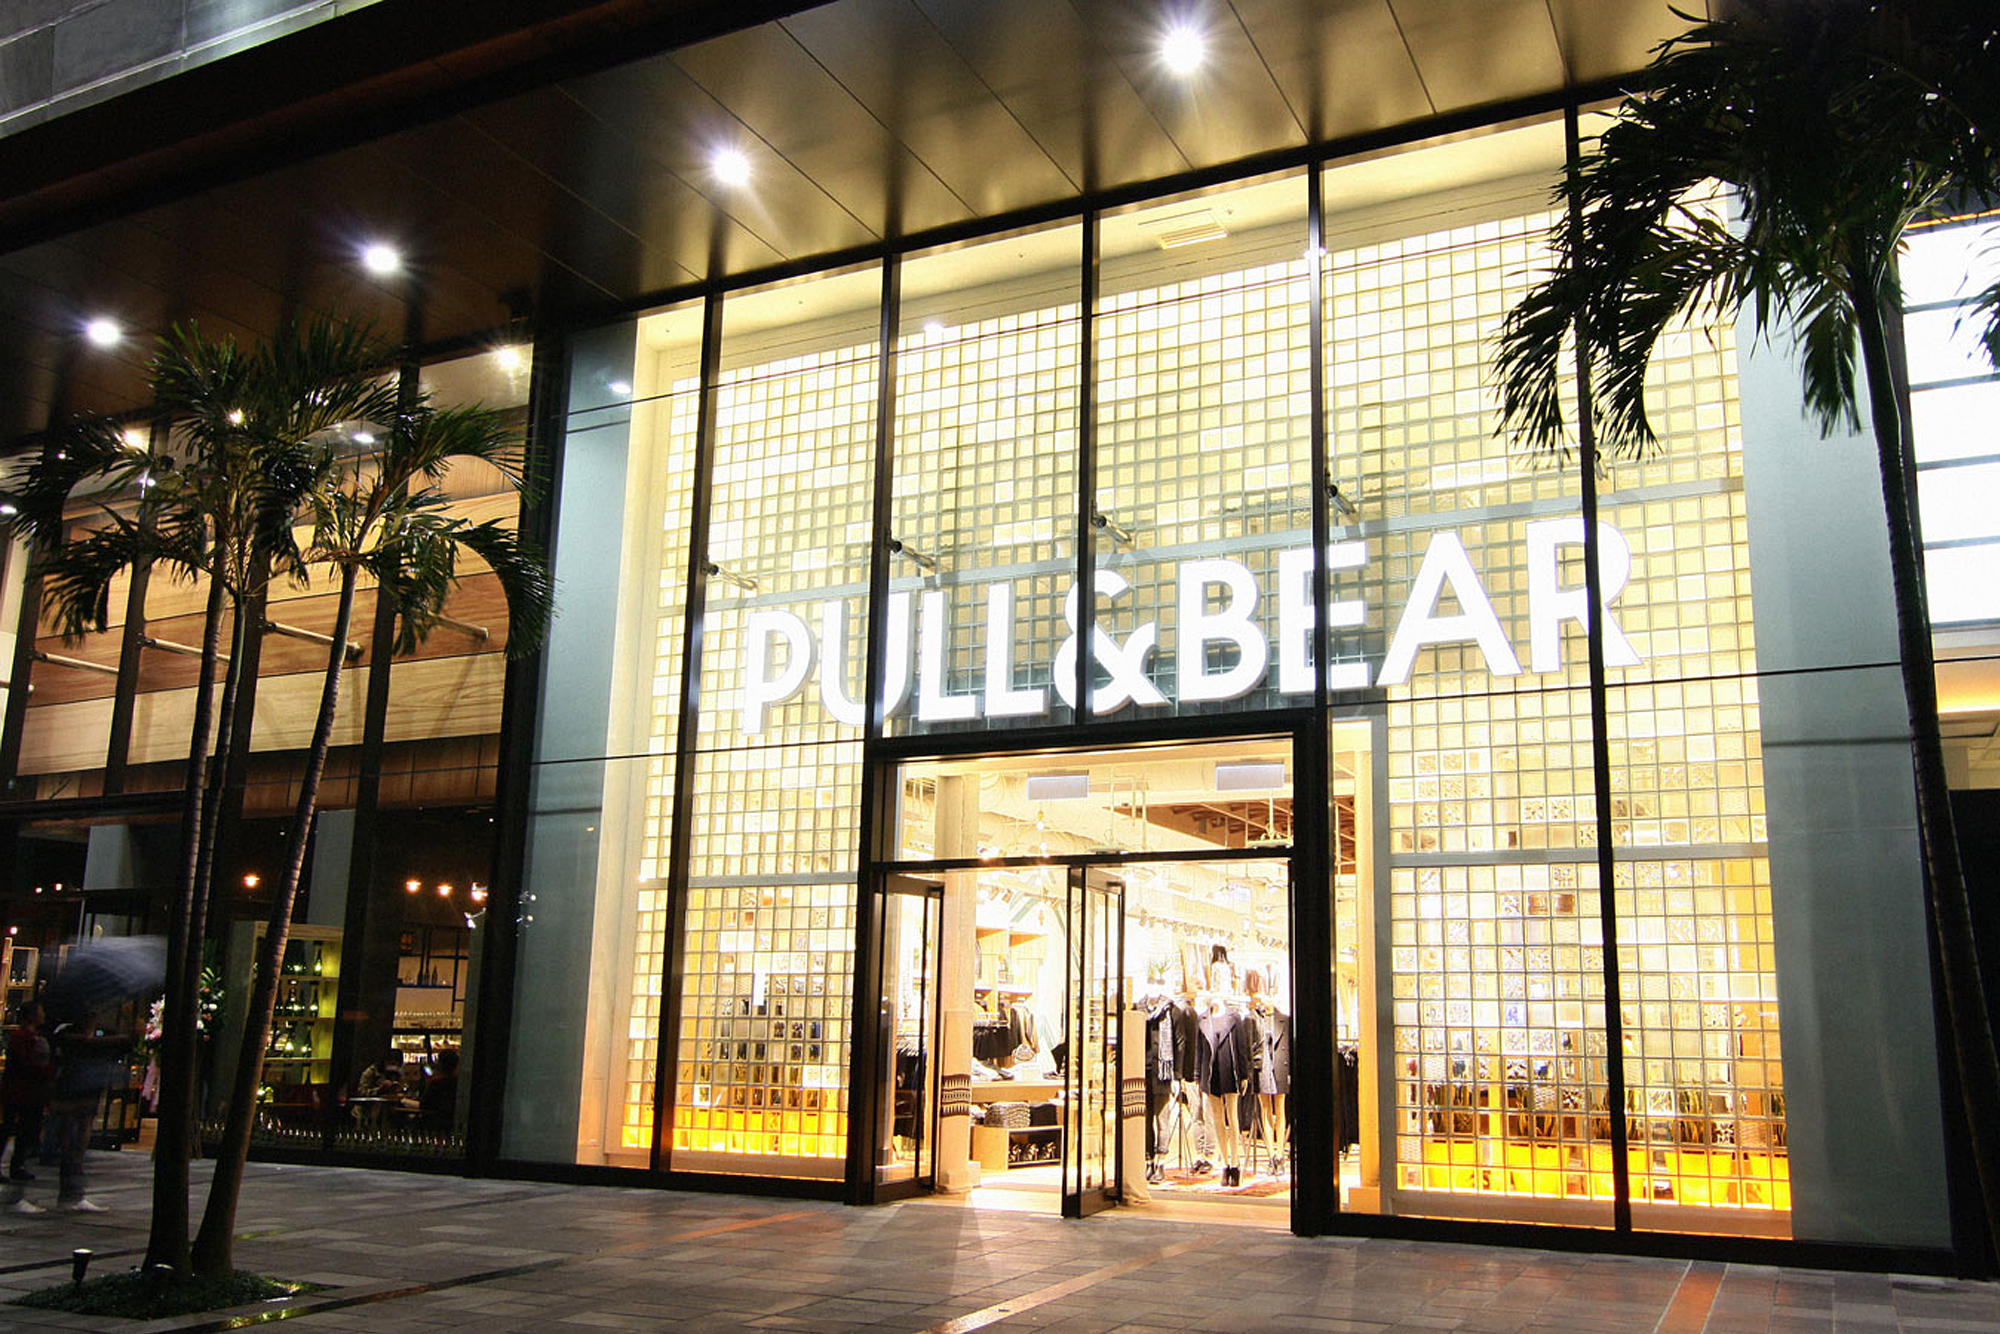 Bear pull and PULL&BEAR for